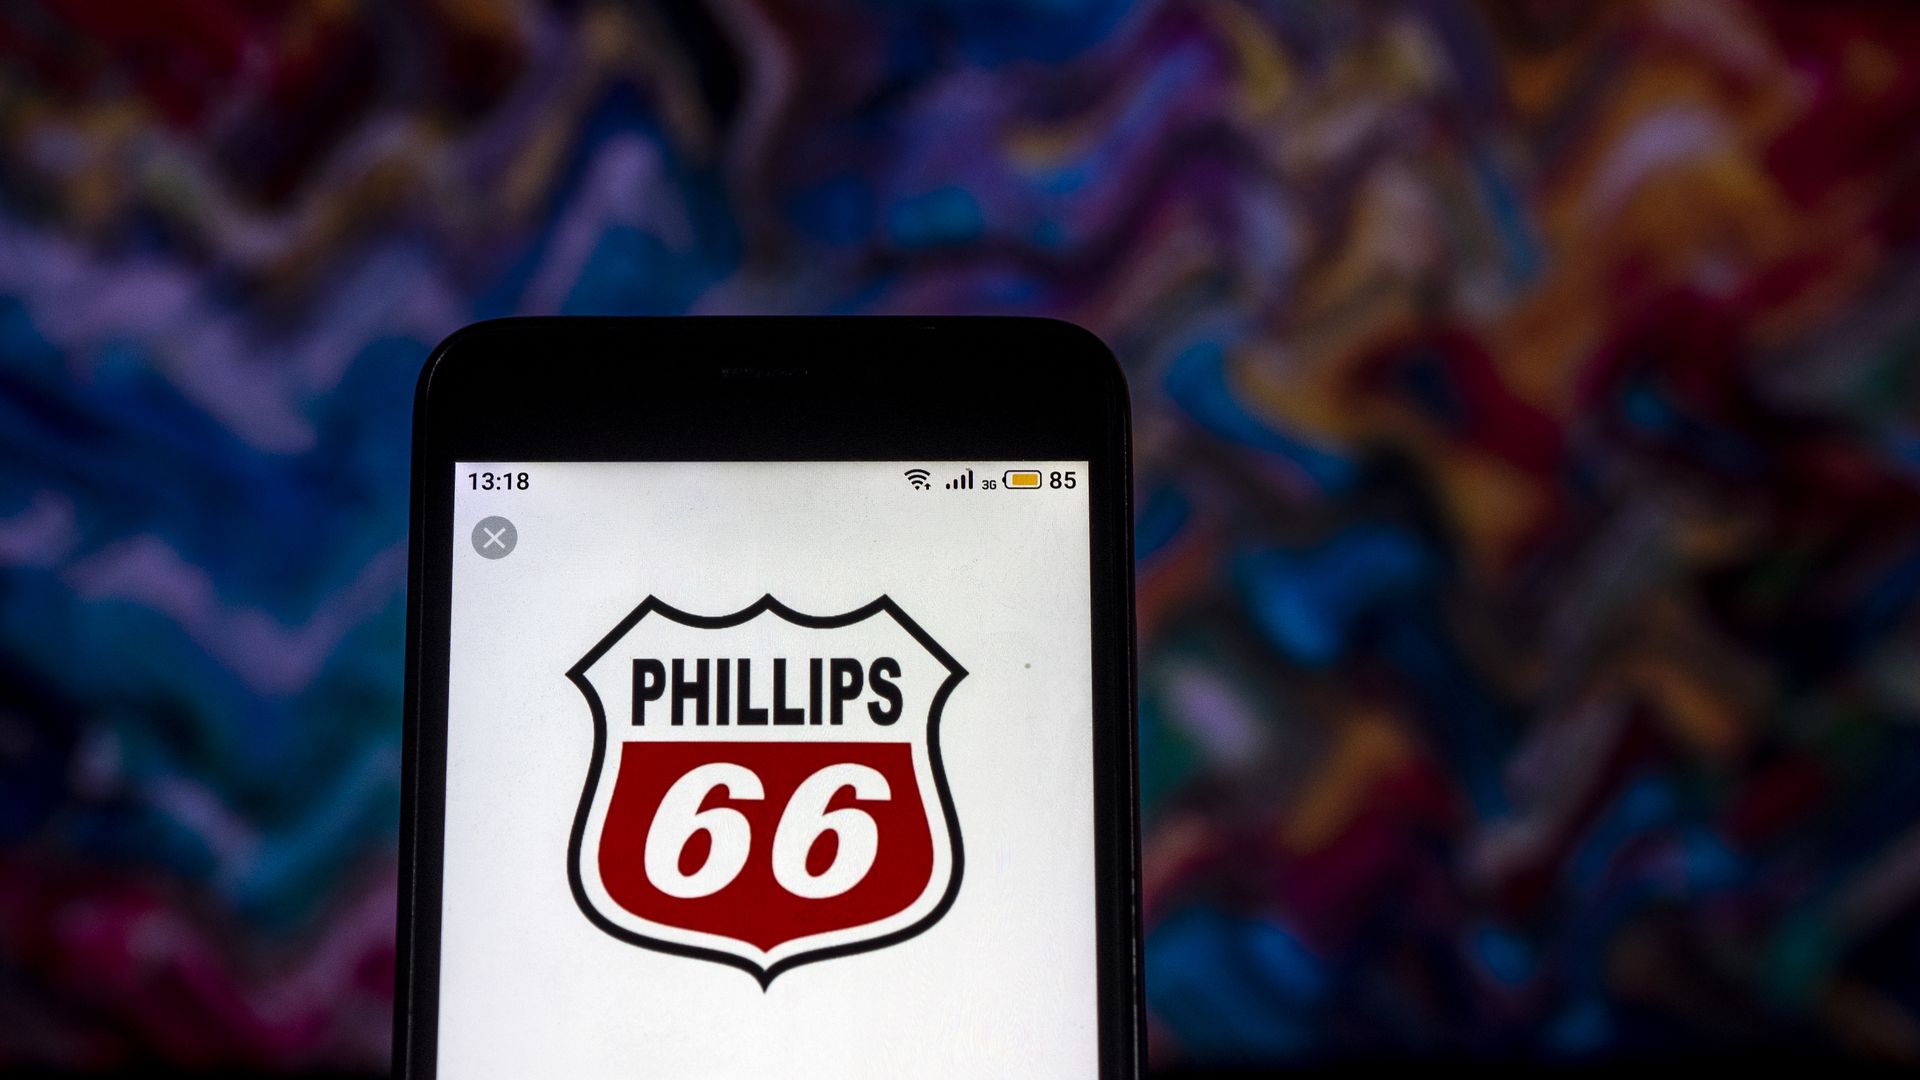 The Phillips 66 Company logo seen displayed on smart phone.